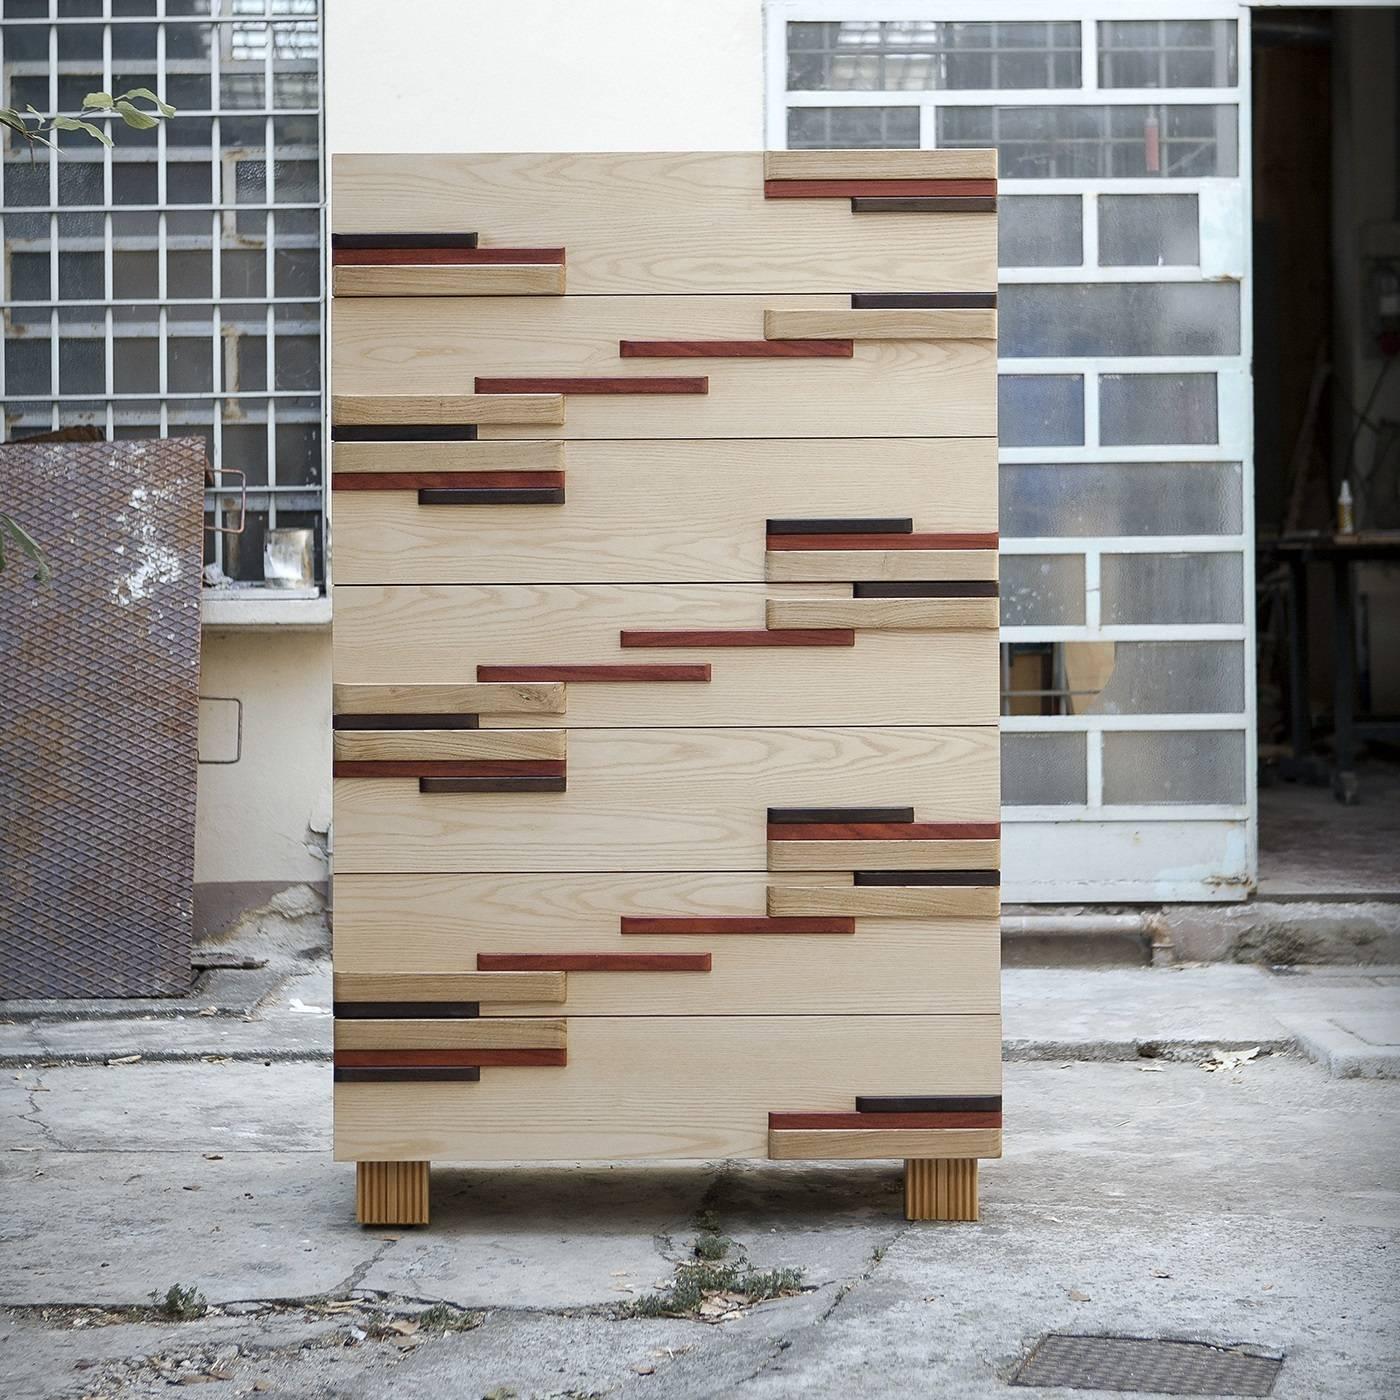 This unique chest of drawers is sure to make a statement in any decor, particularly if made of contemporary pieces. Its seven front panels are adorned with geometric elements arranged as a sort of music staff made of different woods whose colors and